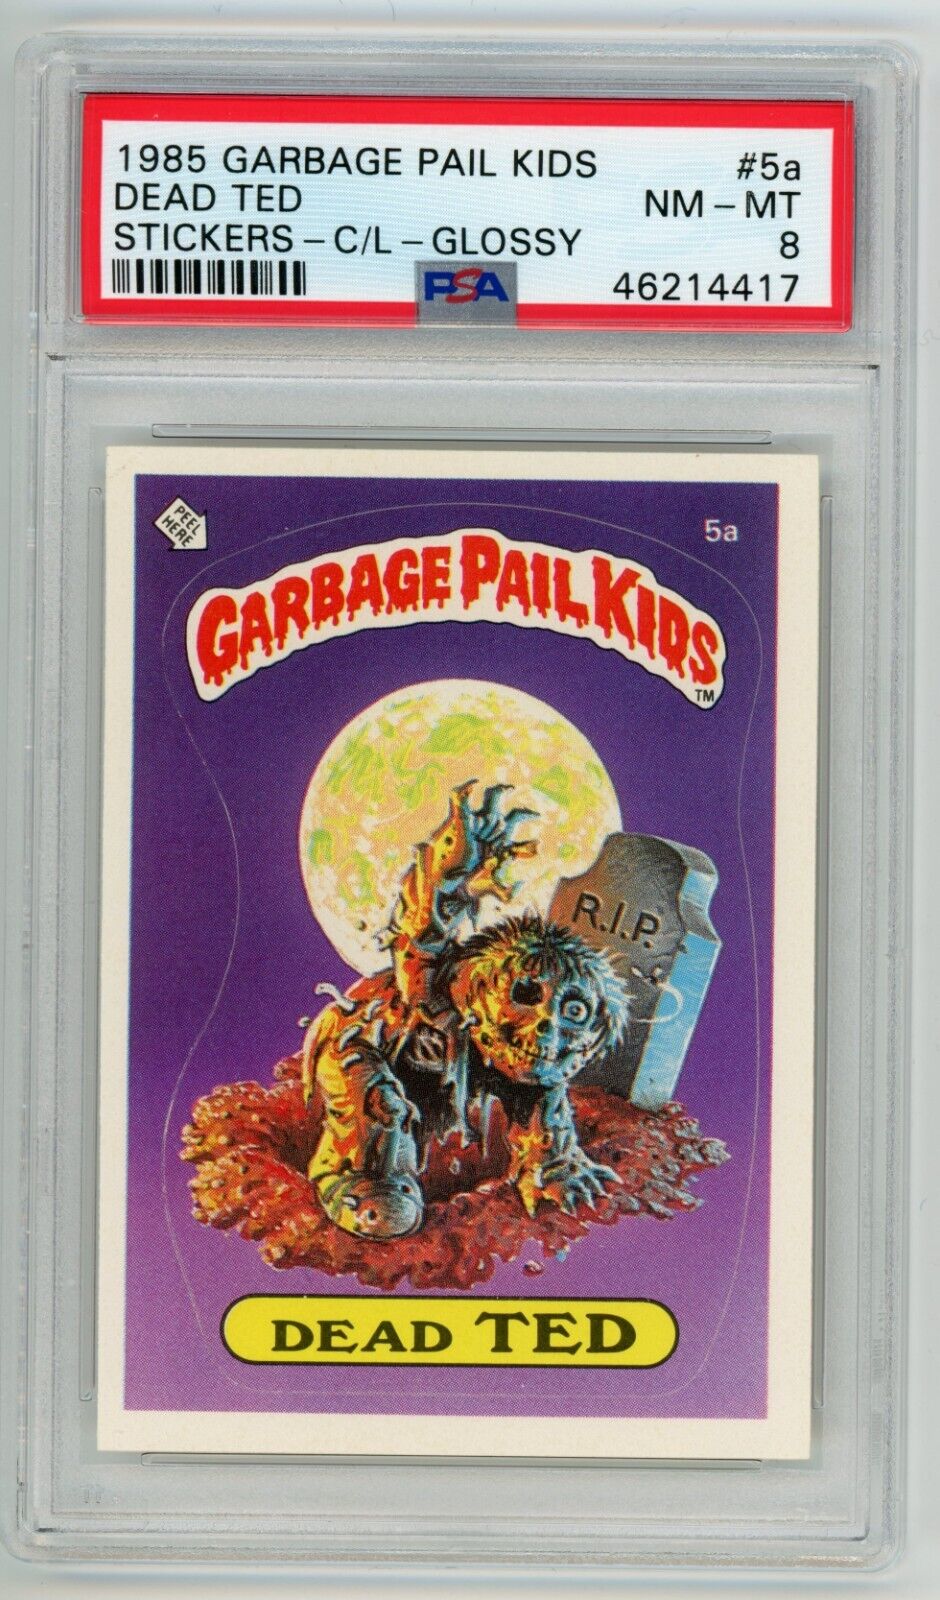 '85 Topps Garbage Pail Kids OS1 Series 1 DEAD TED CHECKLIST 5a GLOSSY Card PSA 8